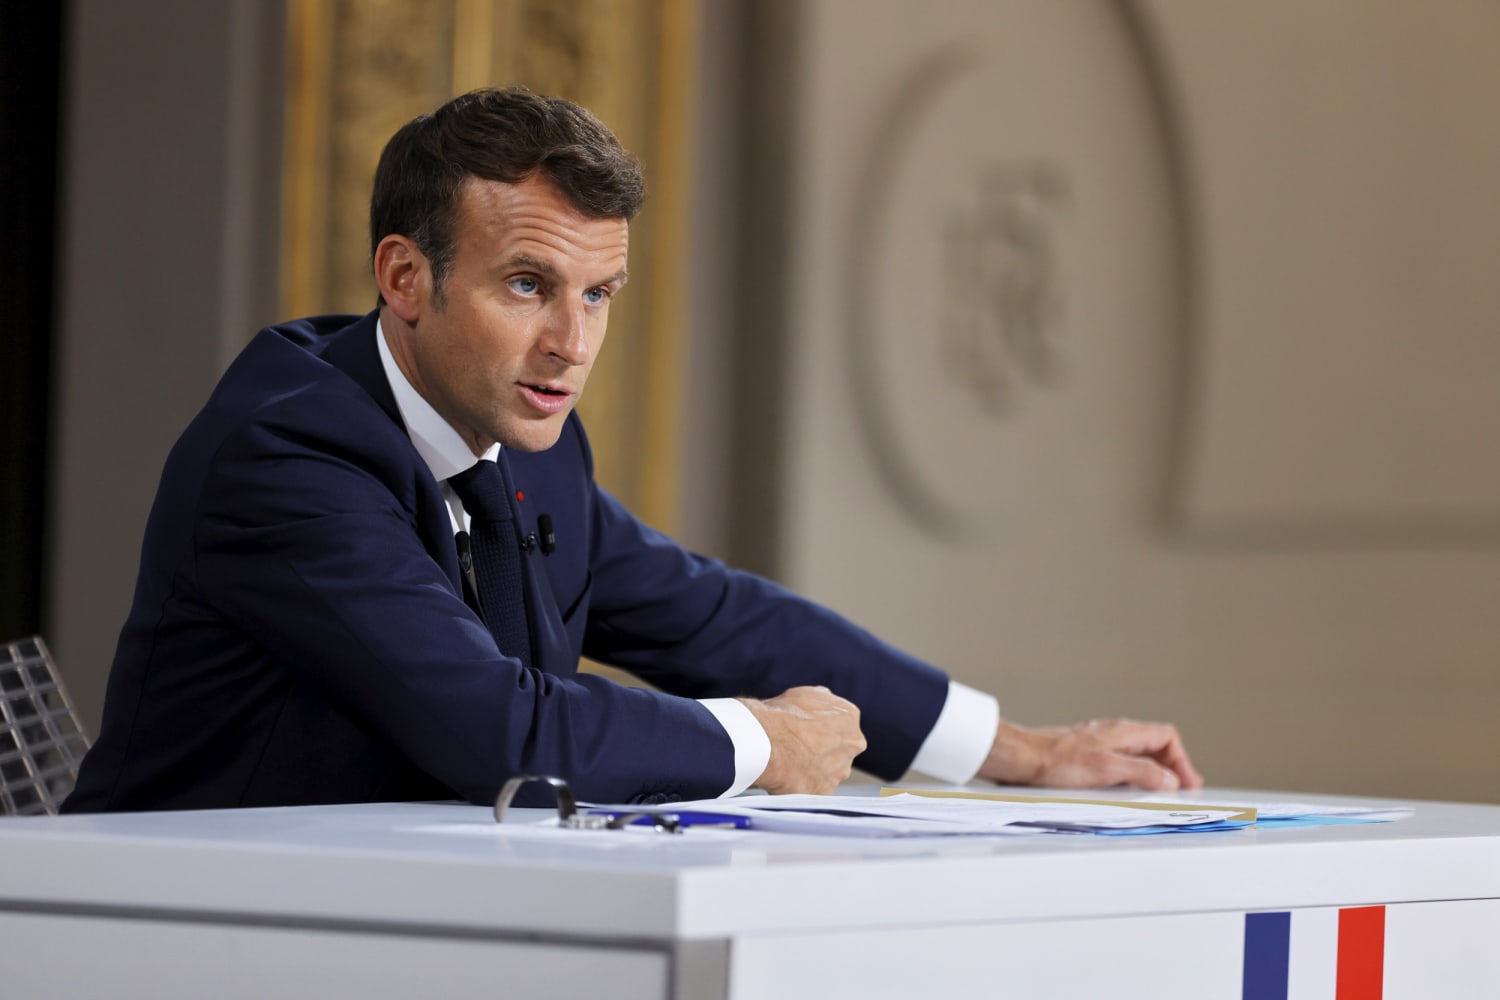 Man Who Slapped French President Emmanuel Macron Gets 4 Months In Prison